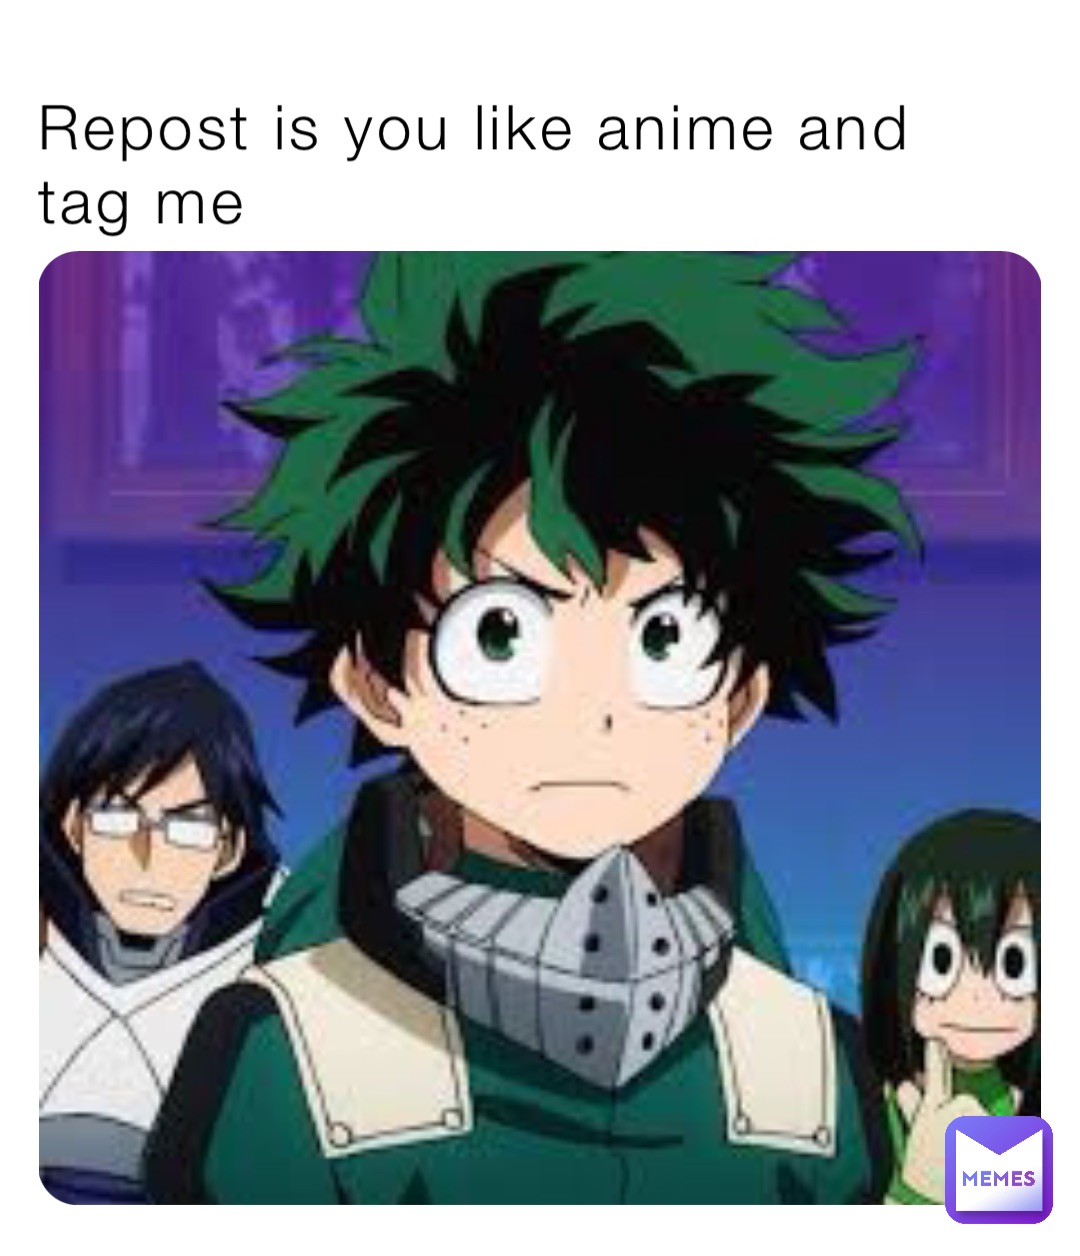 Repost is you like anime and tag me